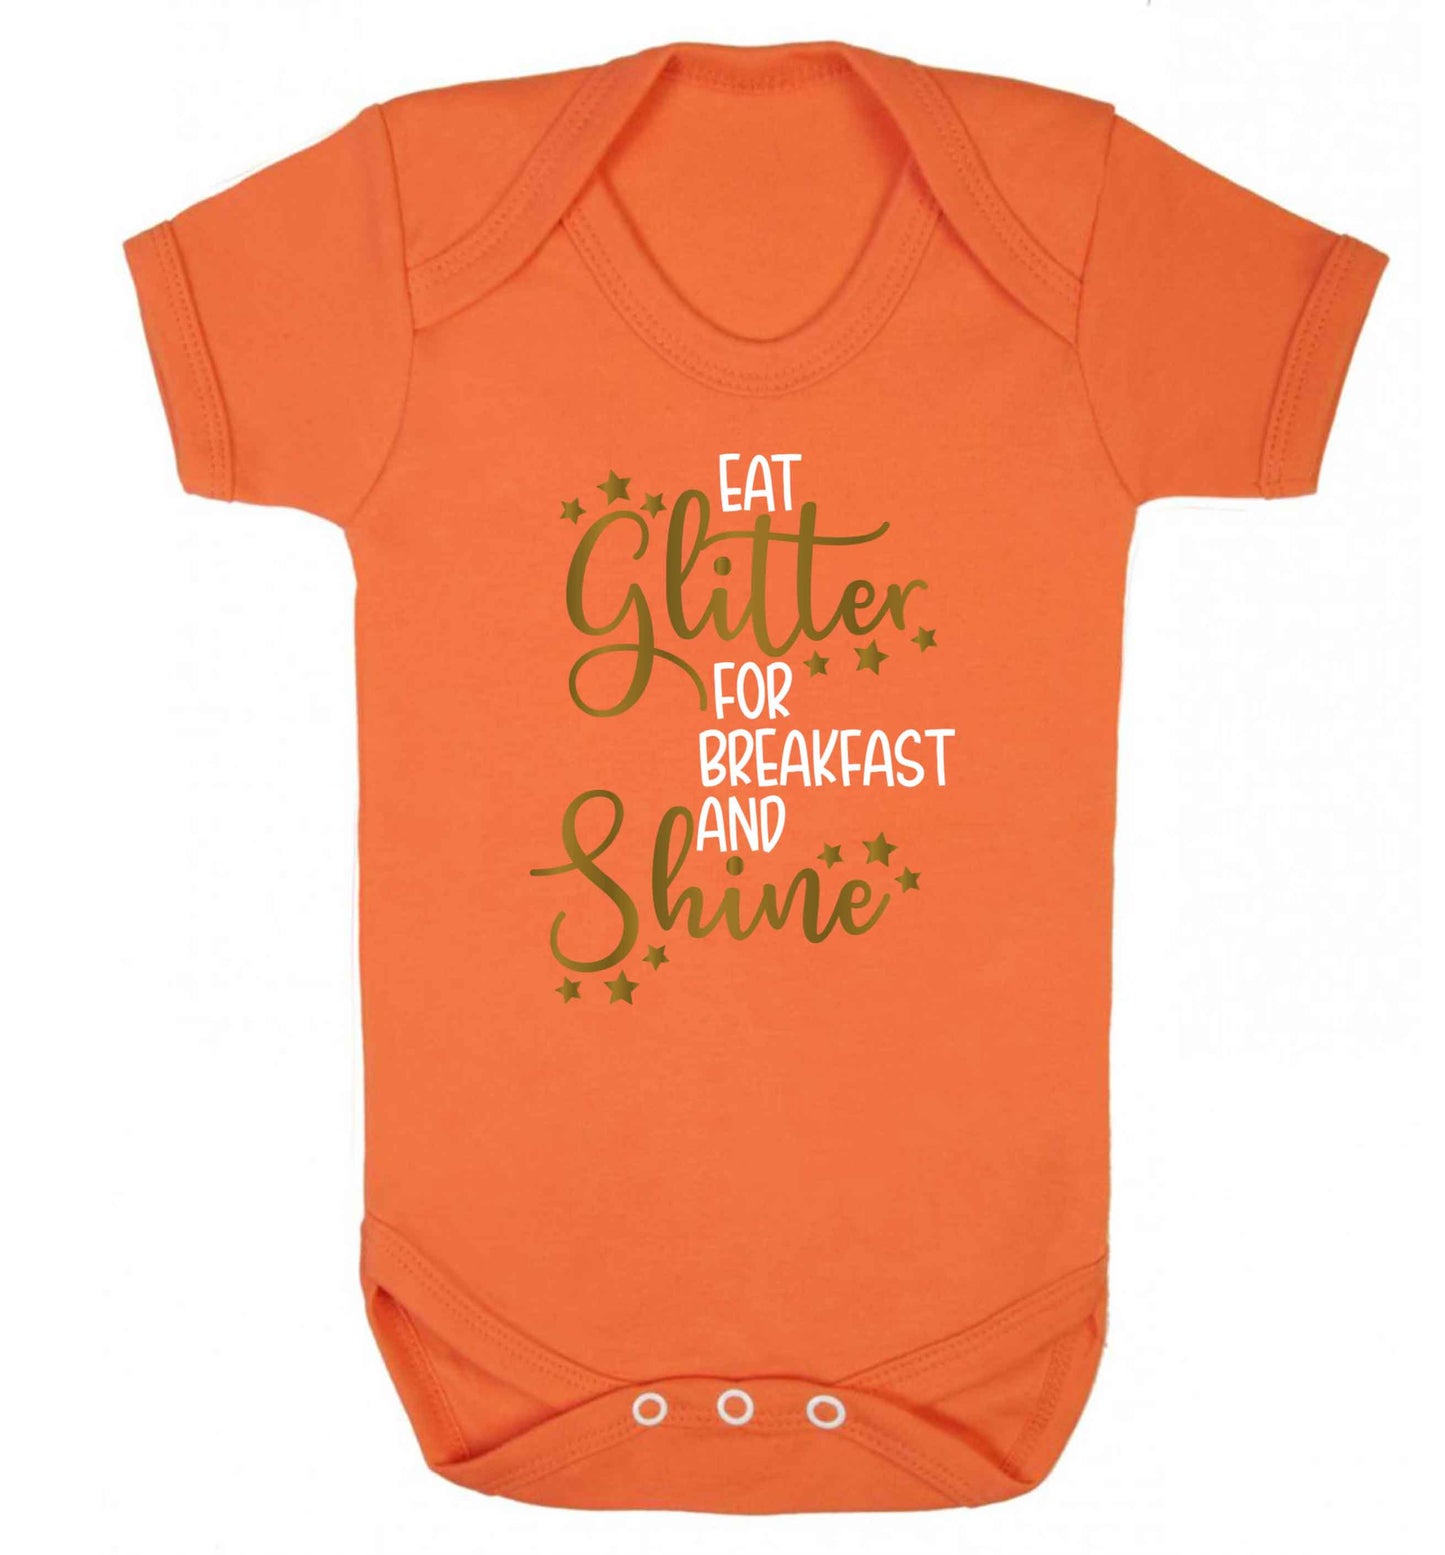 Eat glitter for breakfast and shine all day Baby Vest orange 18-24 months